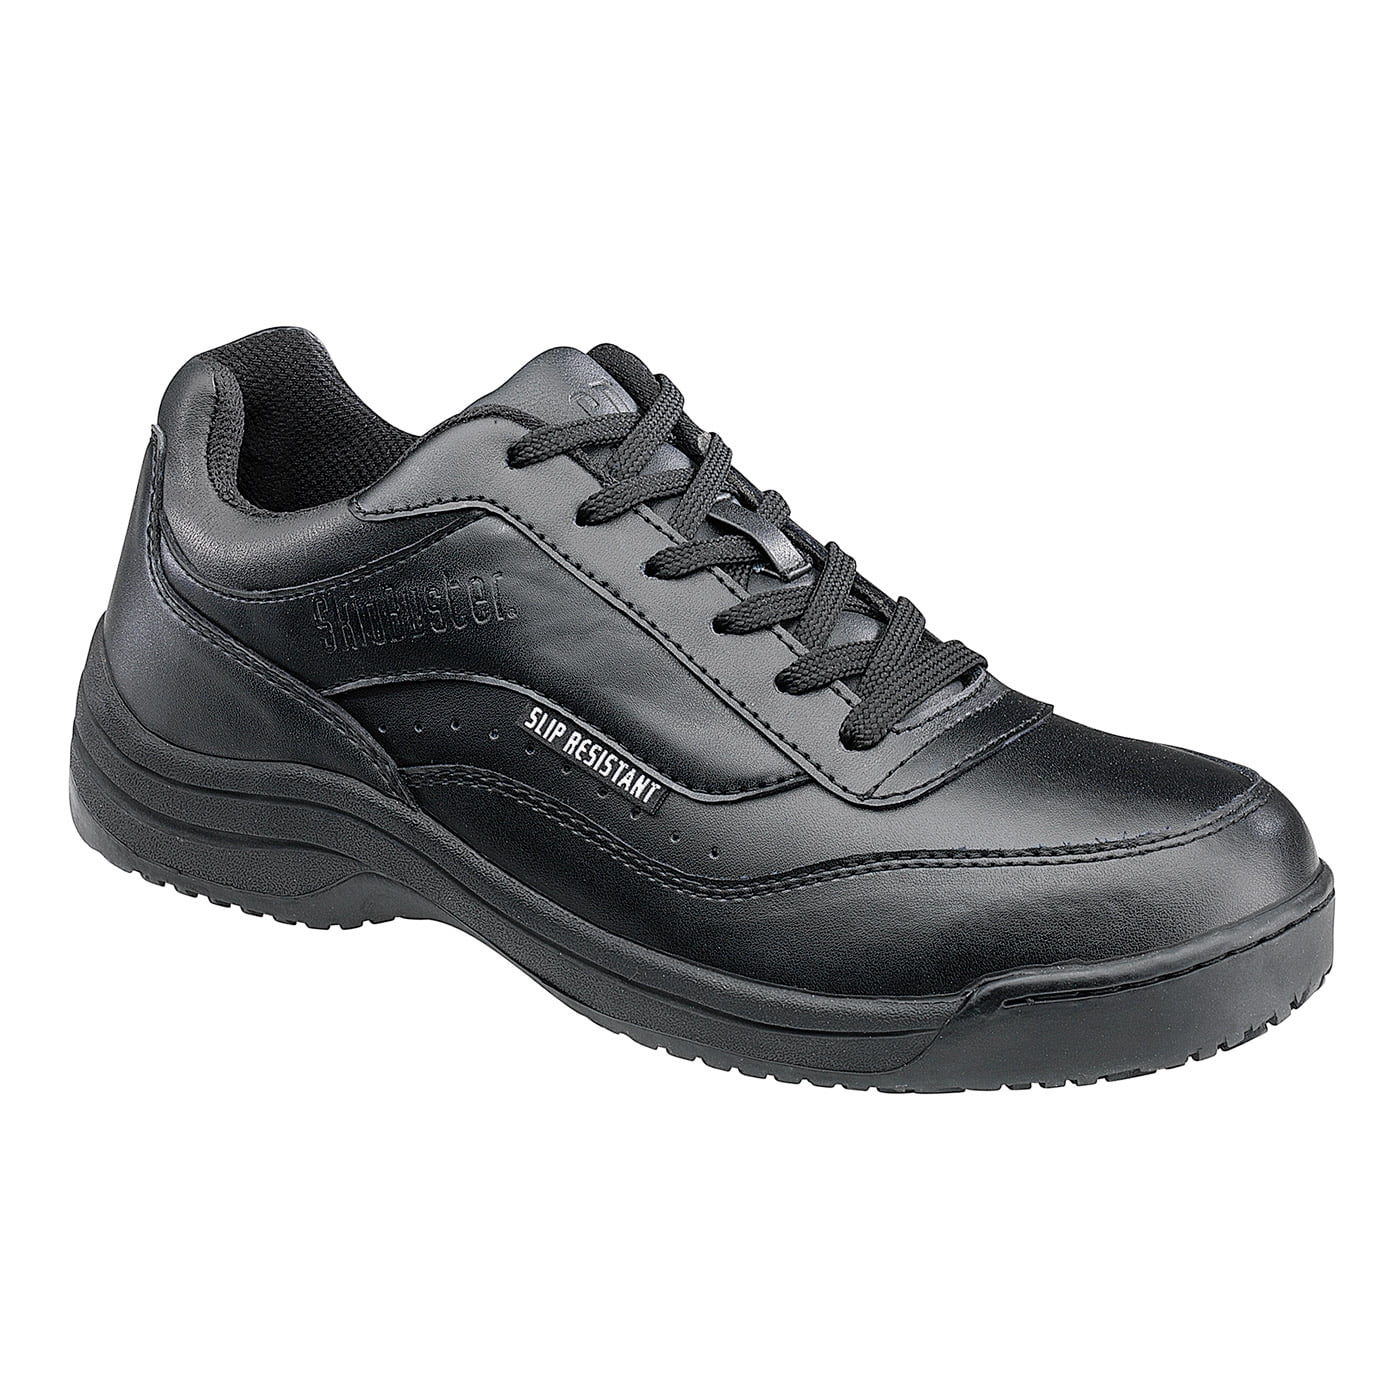 work water resistant shoes